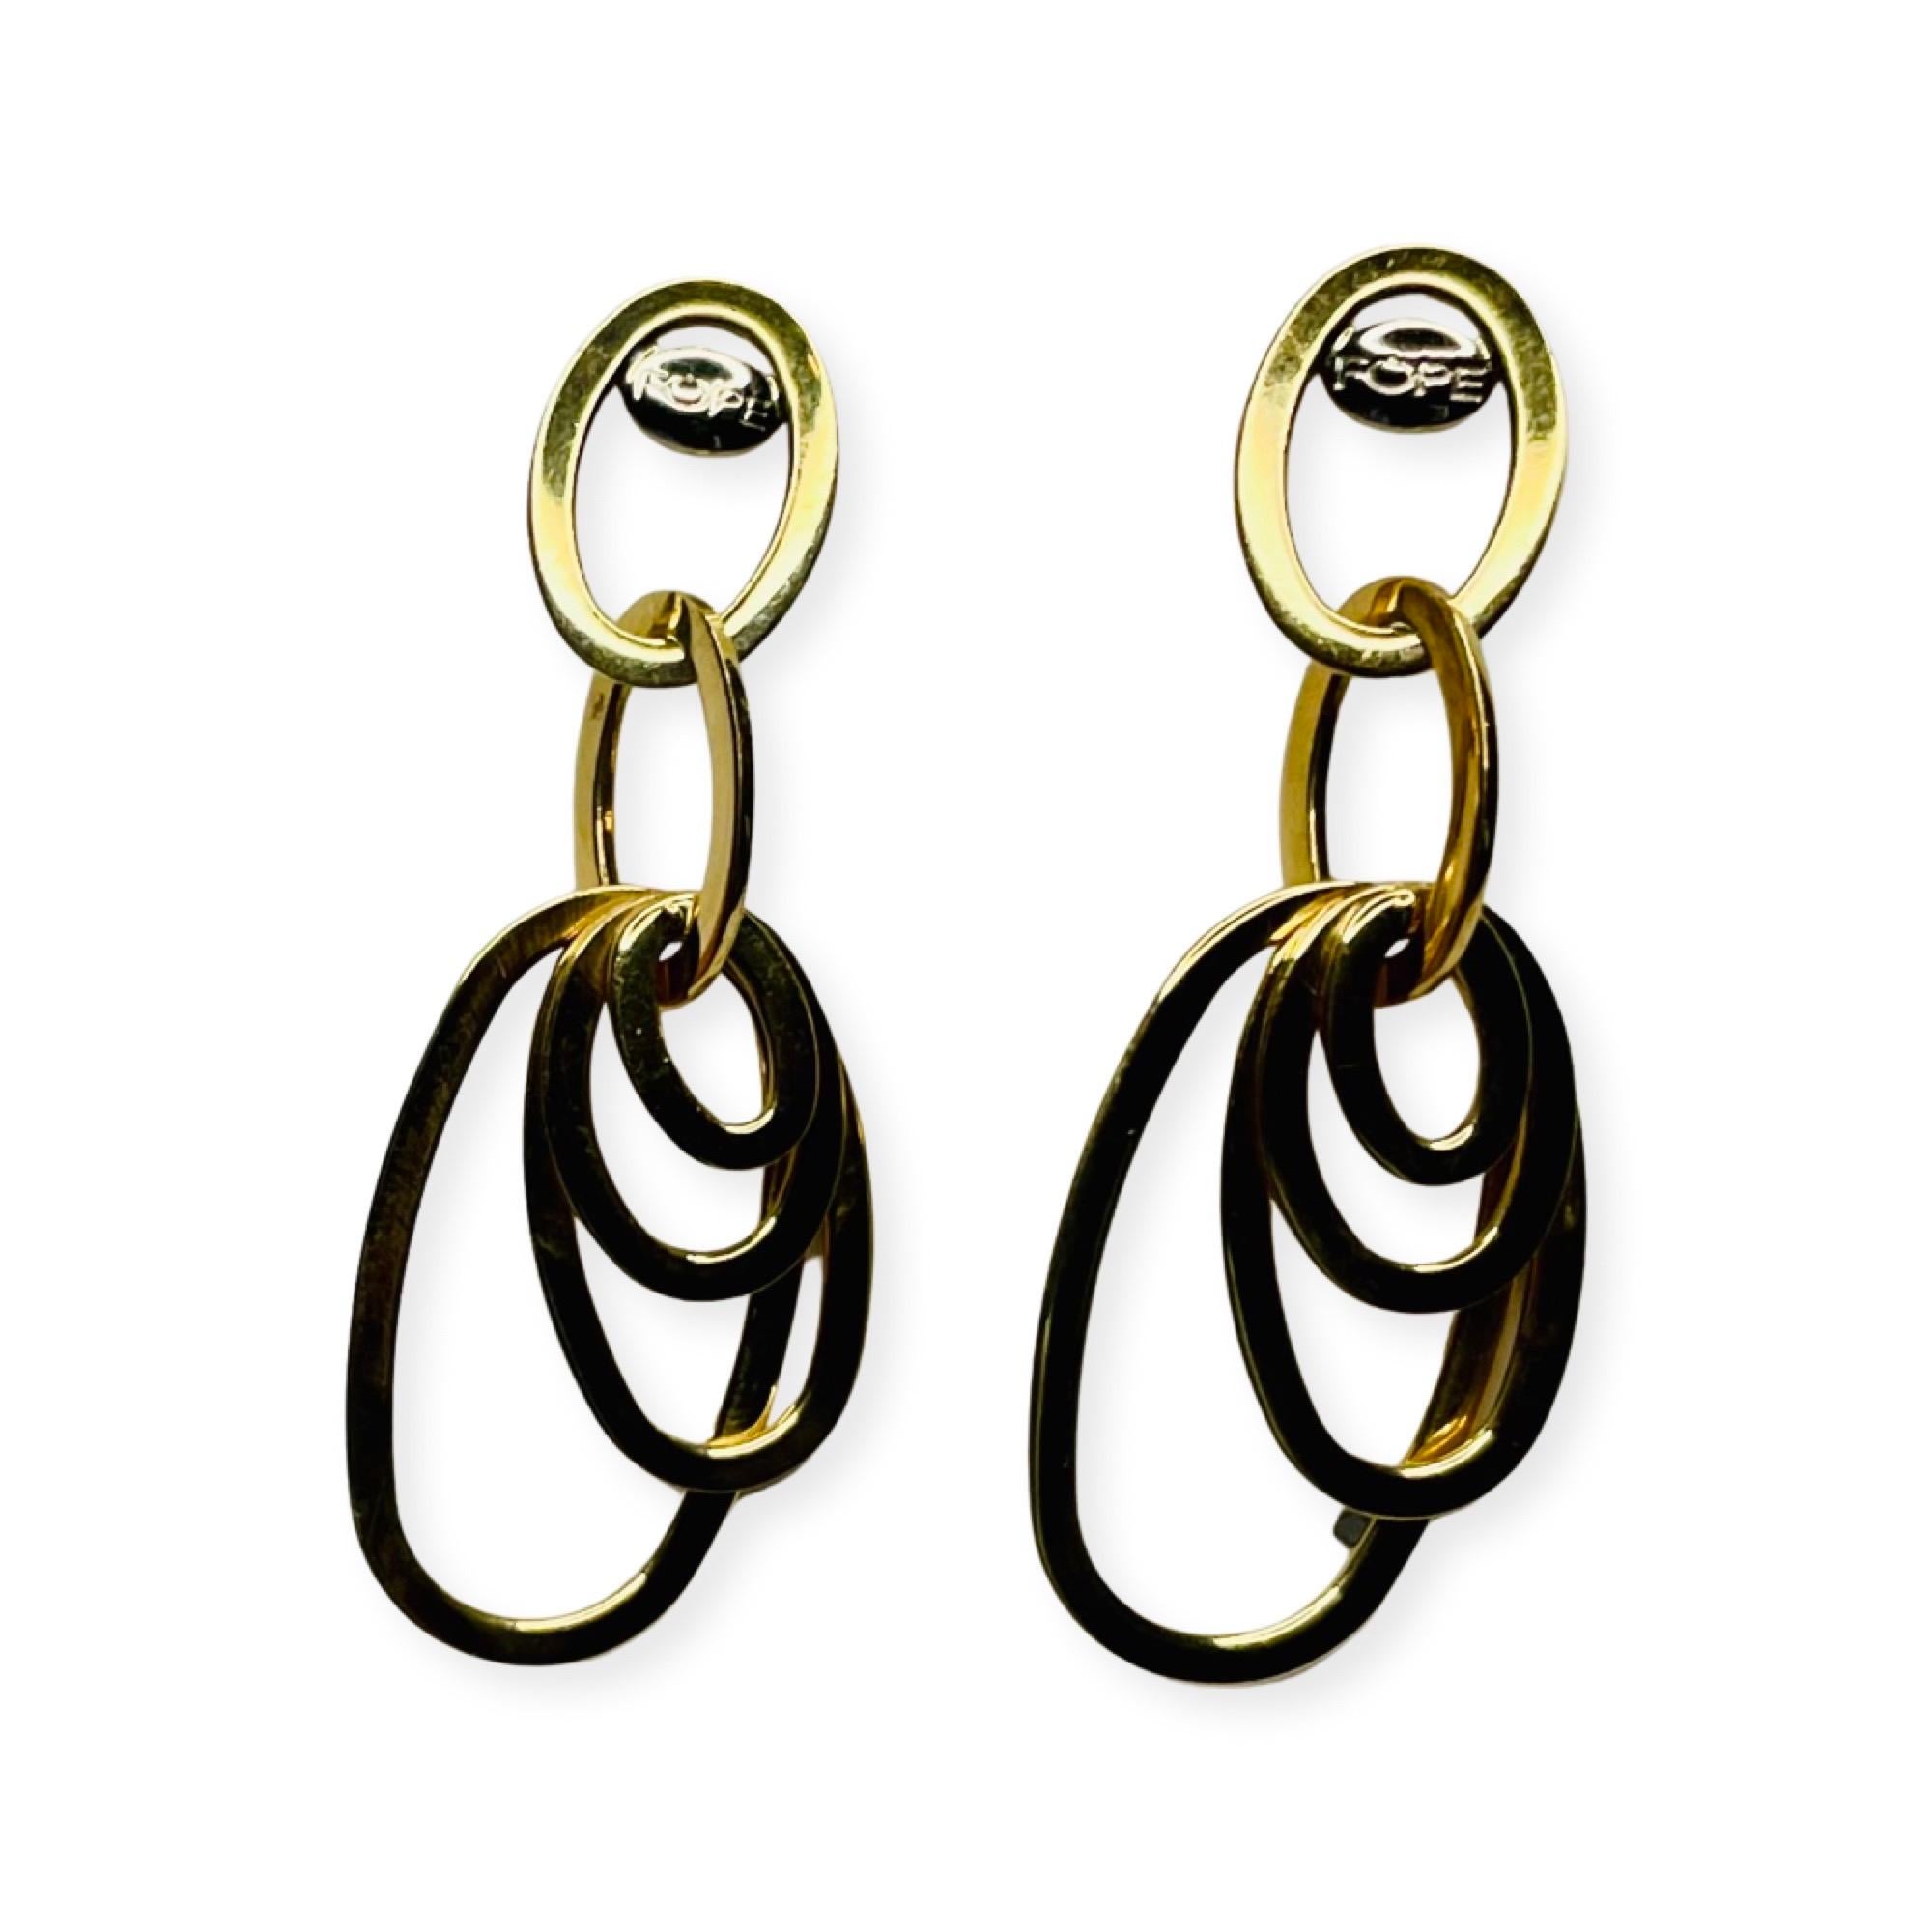 Fope 18K Yellow Gold Earrings. They are 43.0 mm in length. The largest ring is 13.9 mm in length. They have 14K yellow gold backs embedded in silicone. 400-50-469 